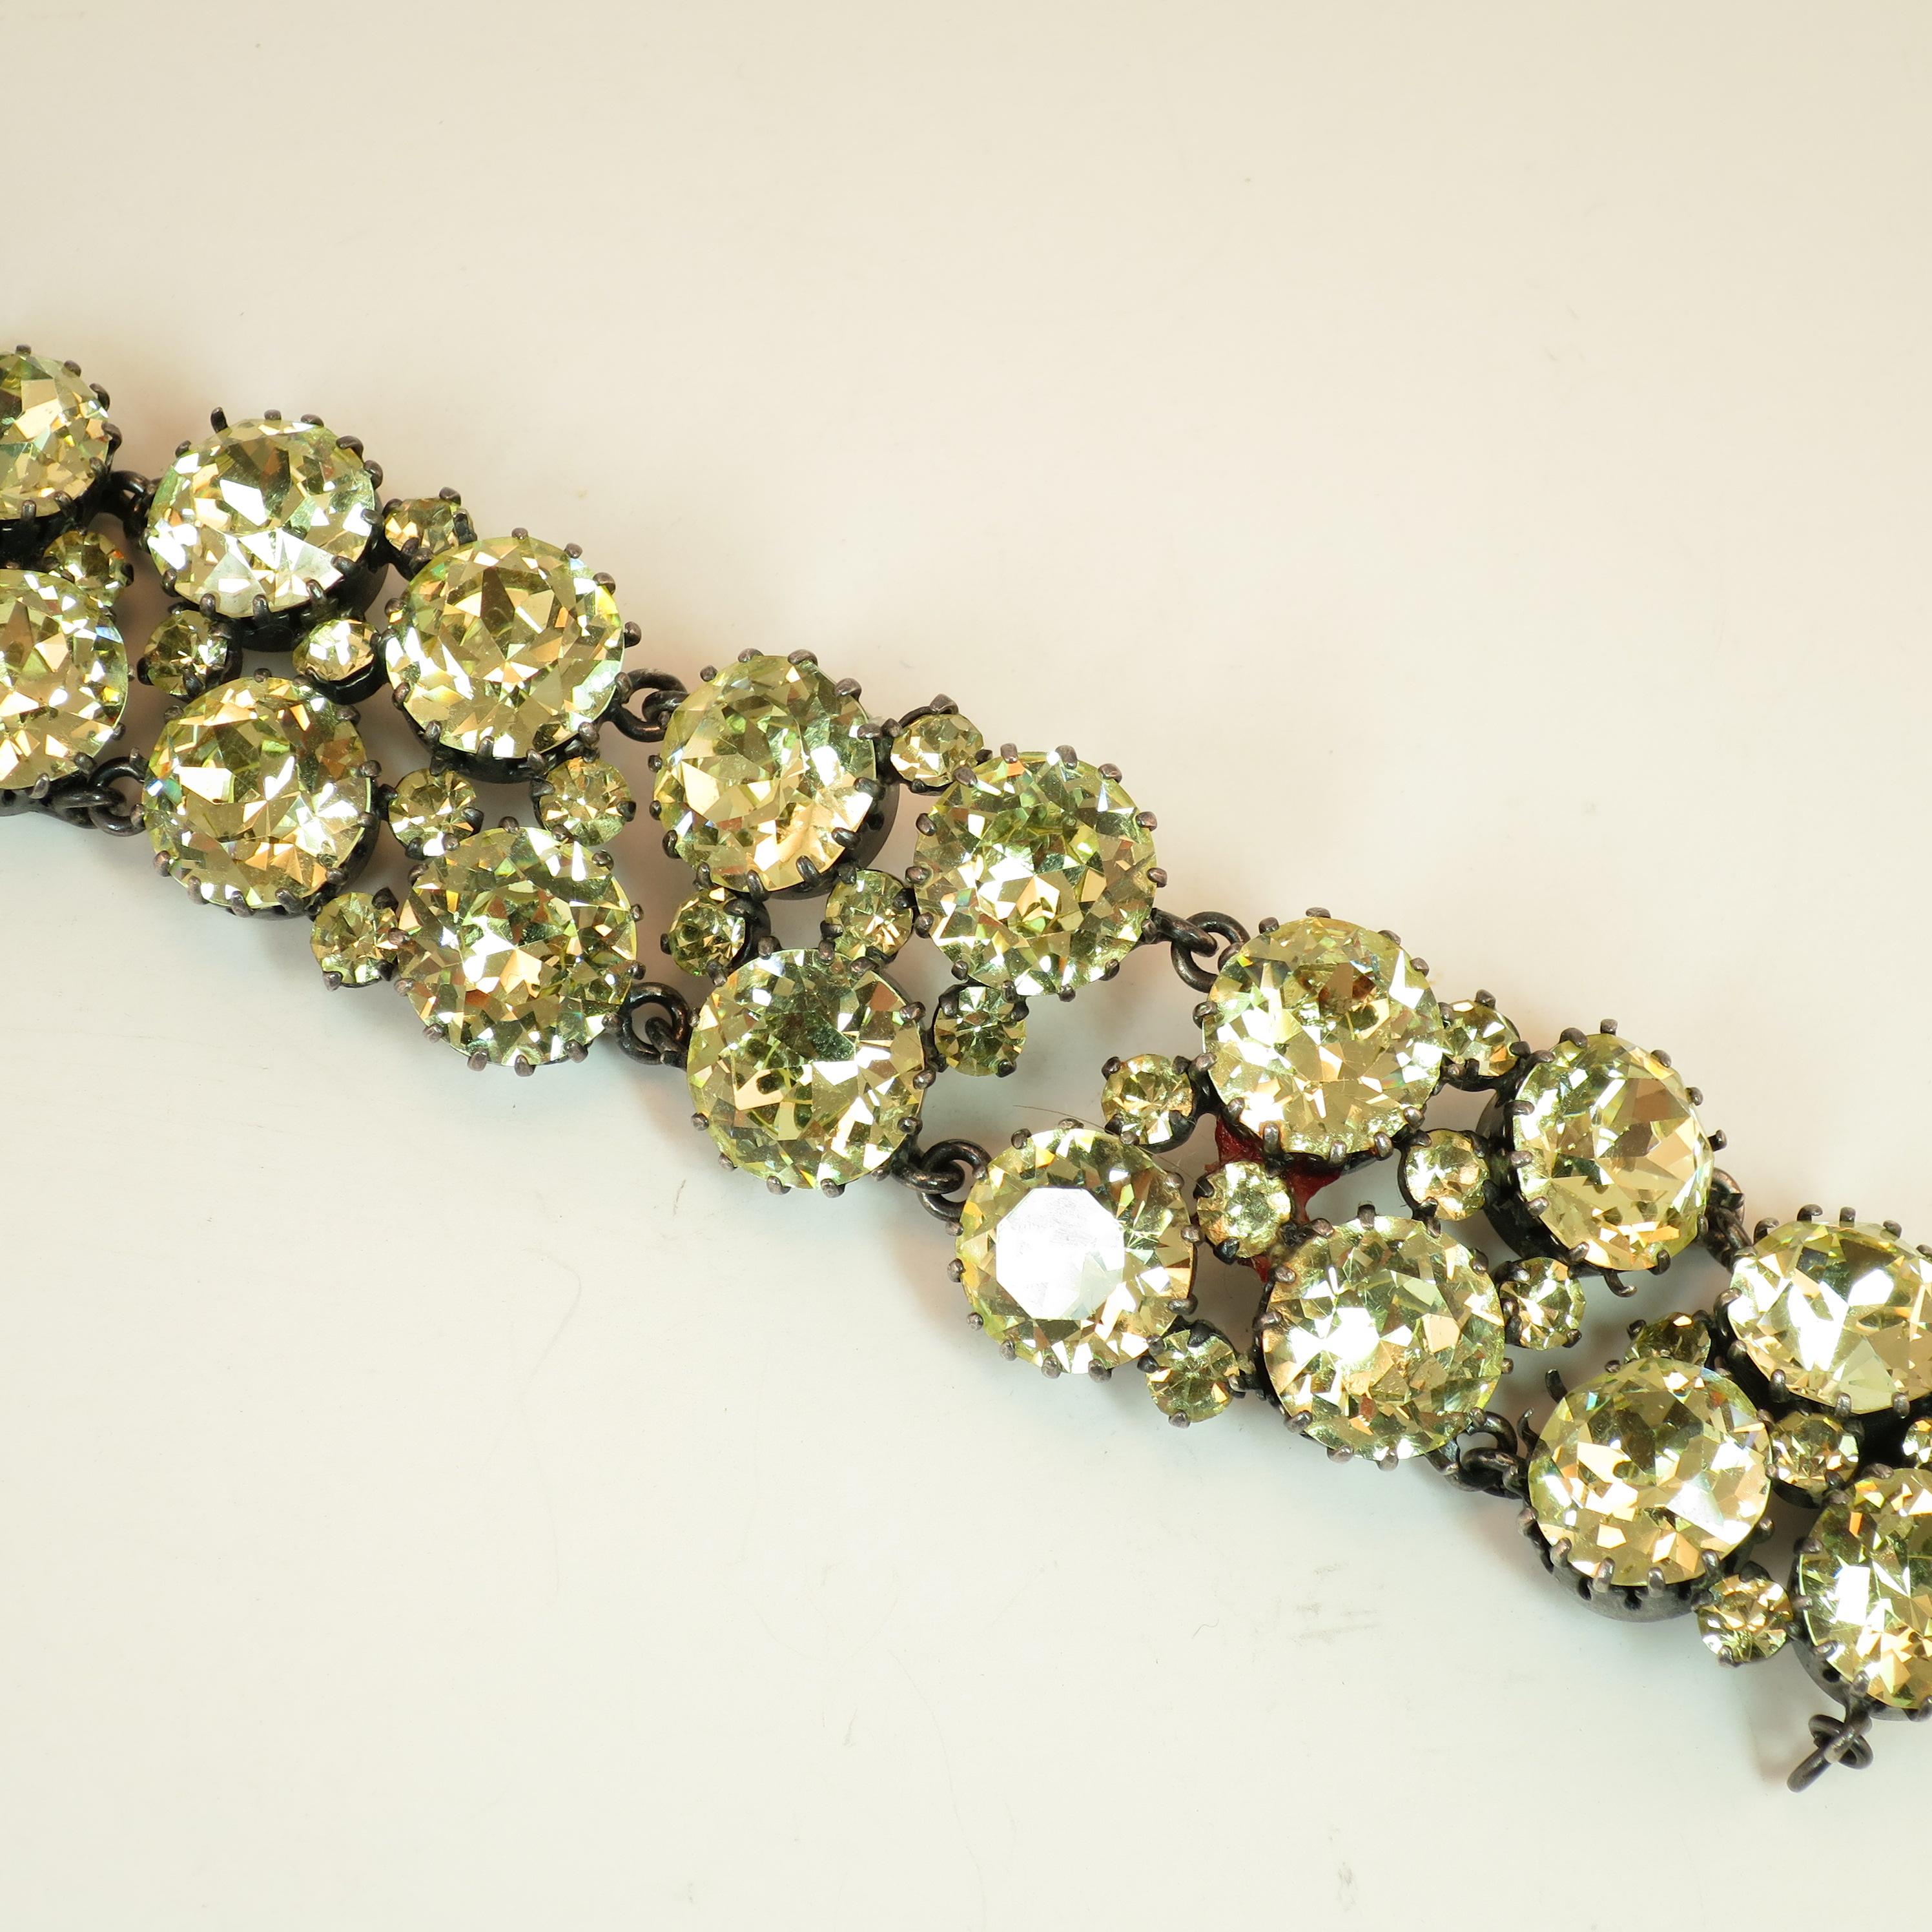 Offered here is an Austrian hand-fashioned crystal link bracelet from the 1930s. The raison d'etre of this glittering bracelet is the large intricately-faceted 